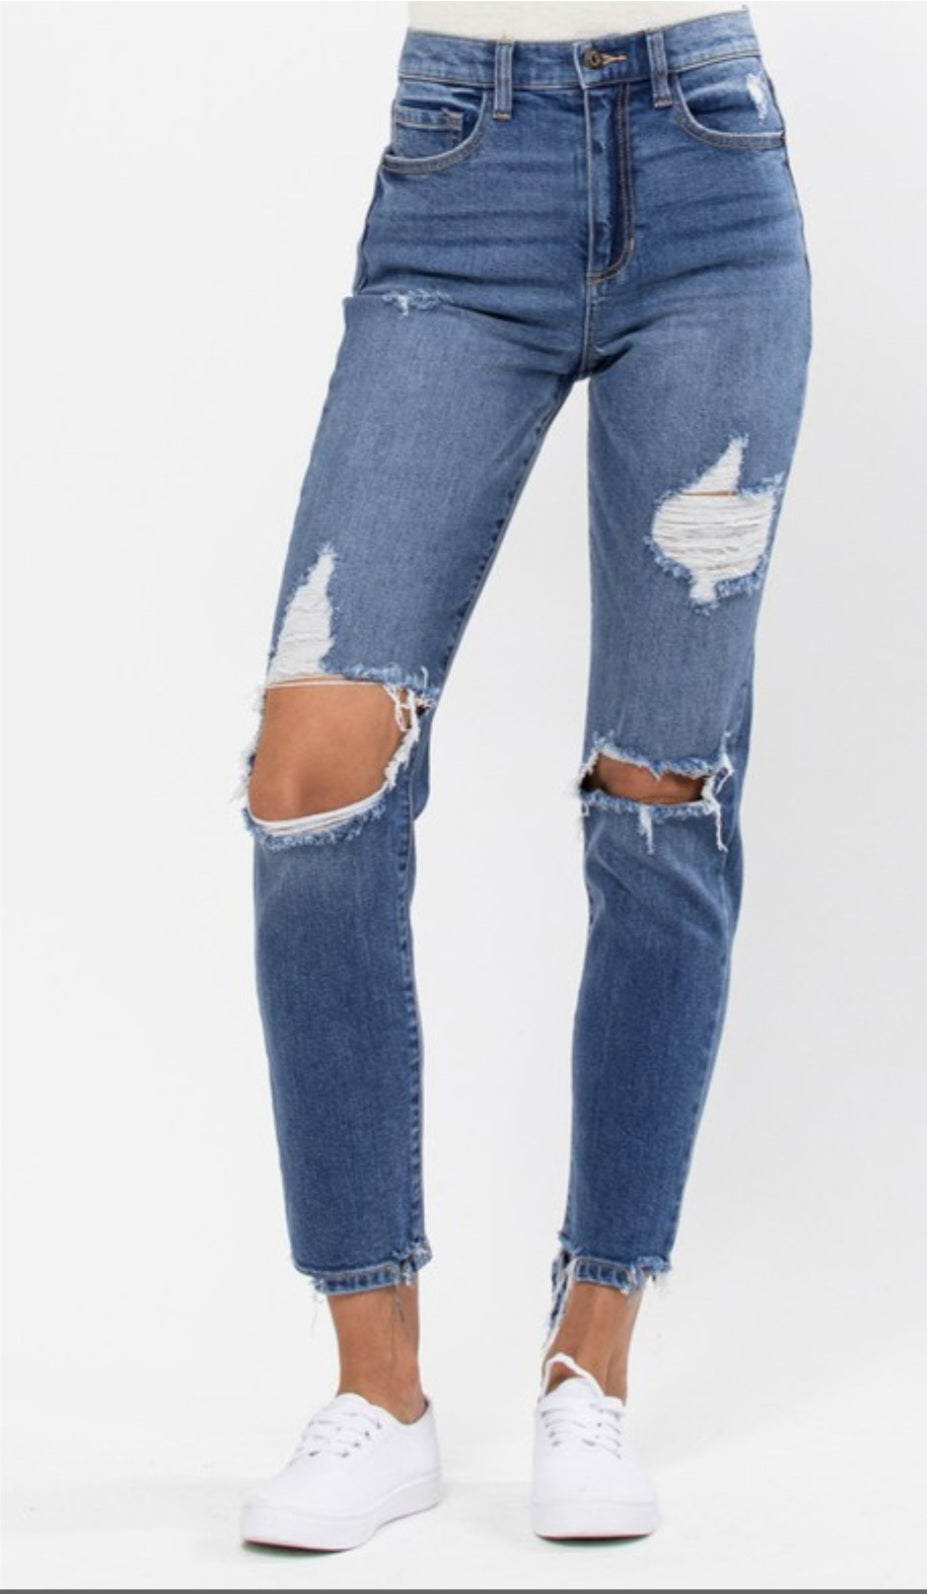 Julee High Rise Jeans